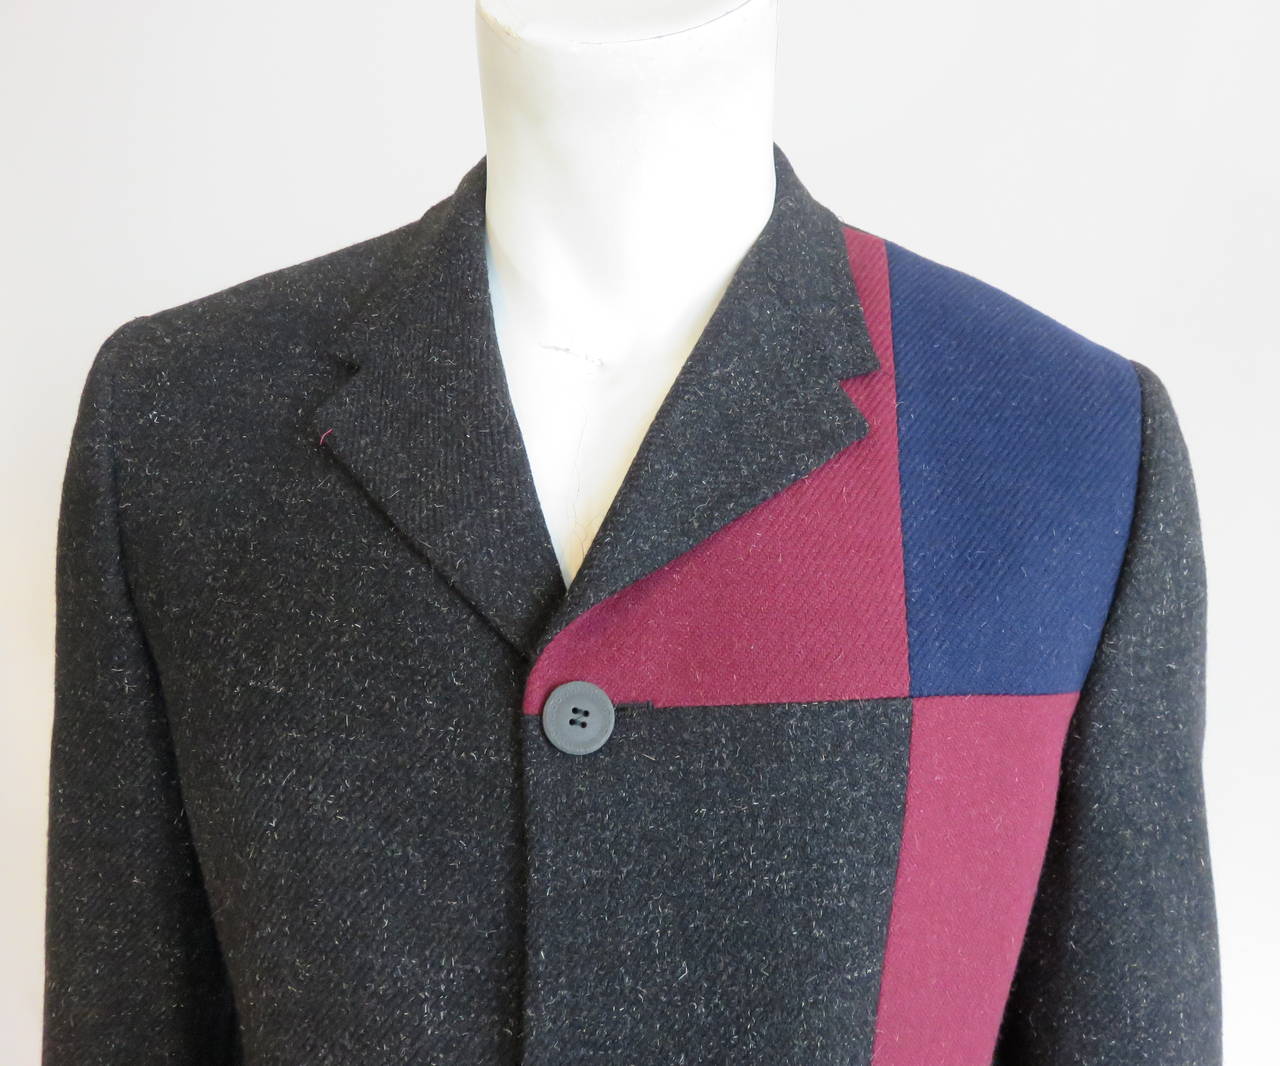 Excellent condition, early 1990's GIANNI VERSACE, men's, wool, color-block blazer.

Dark charcoal, wool twill ground fabric with white woven flecks fabric design.

Solid, raspberry red, and grape purple panel blocking at the wearer's left